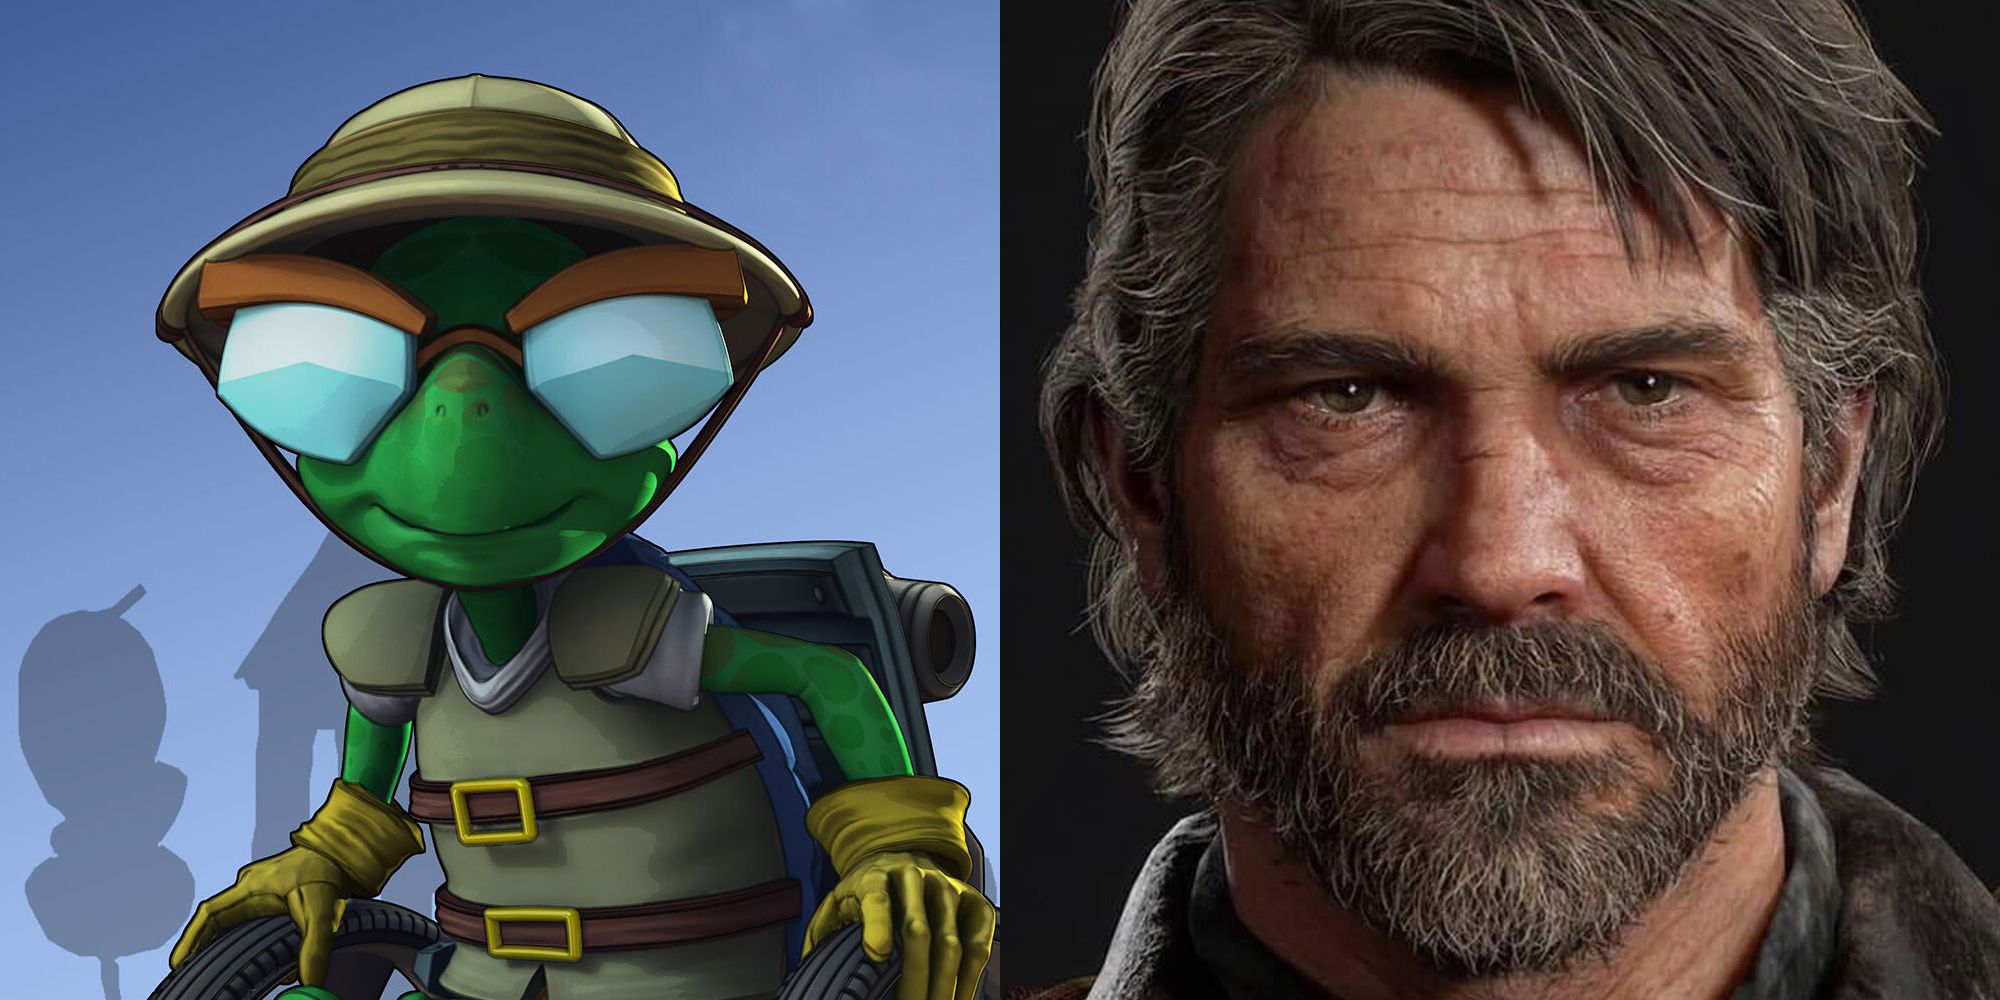 Bentley (Sly Cooper) and Joel (The Last of Us)